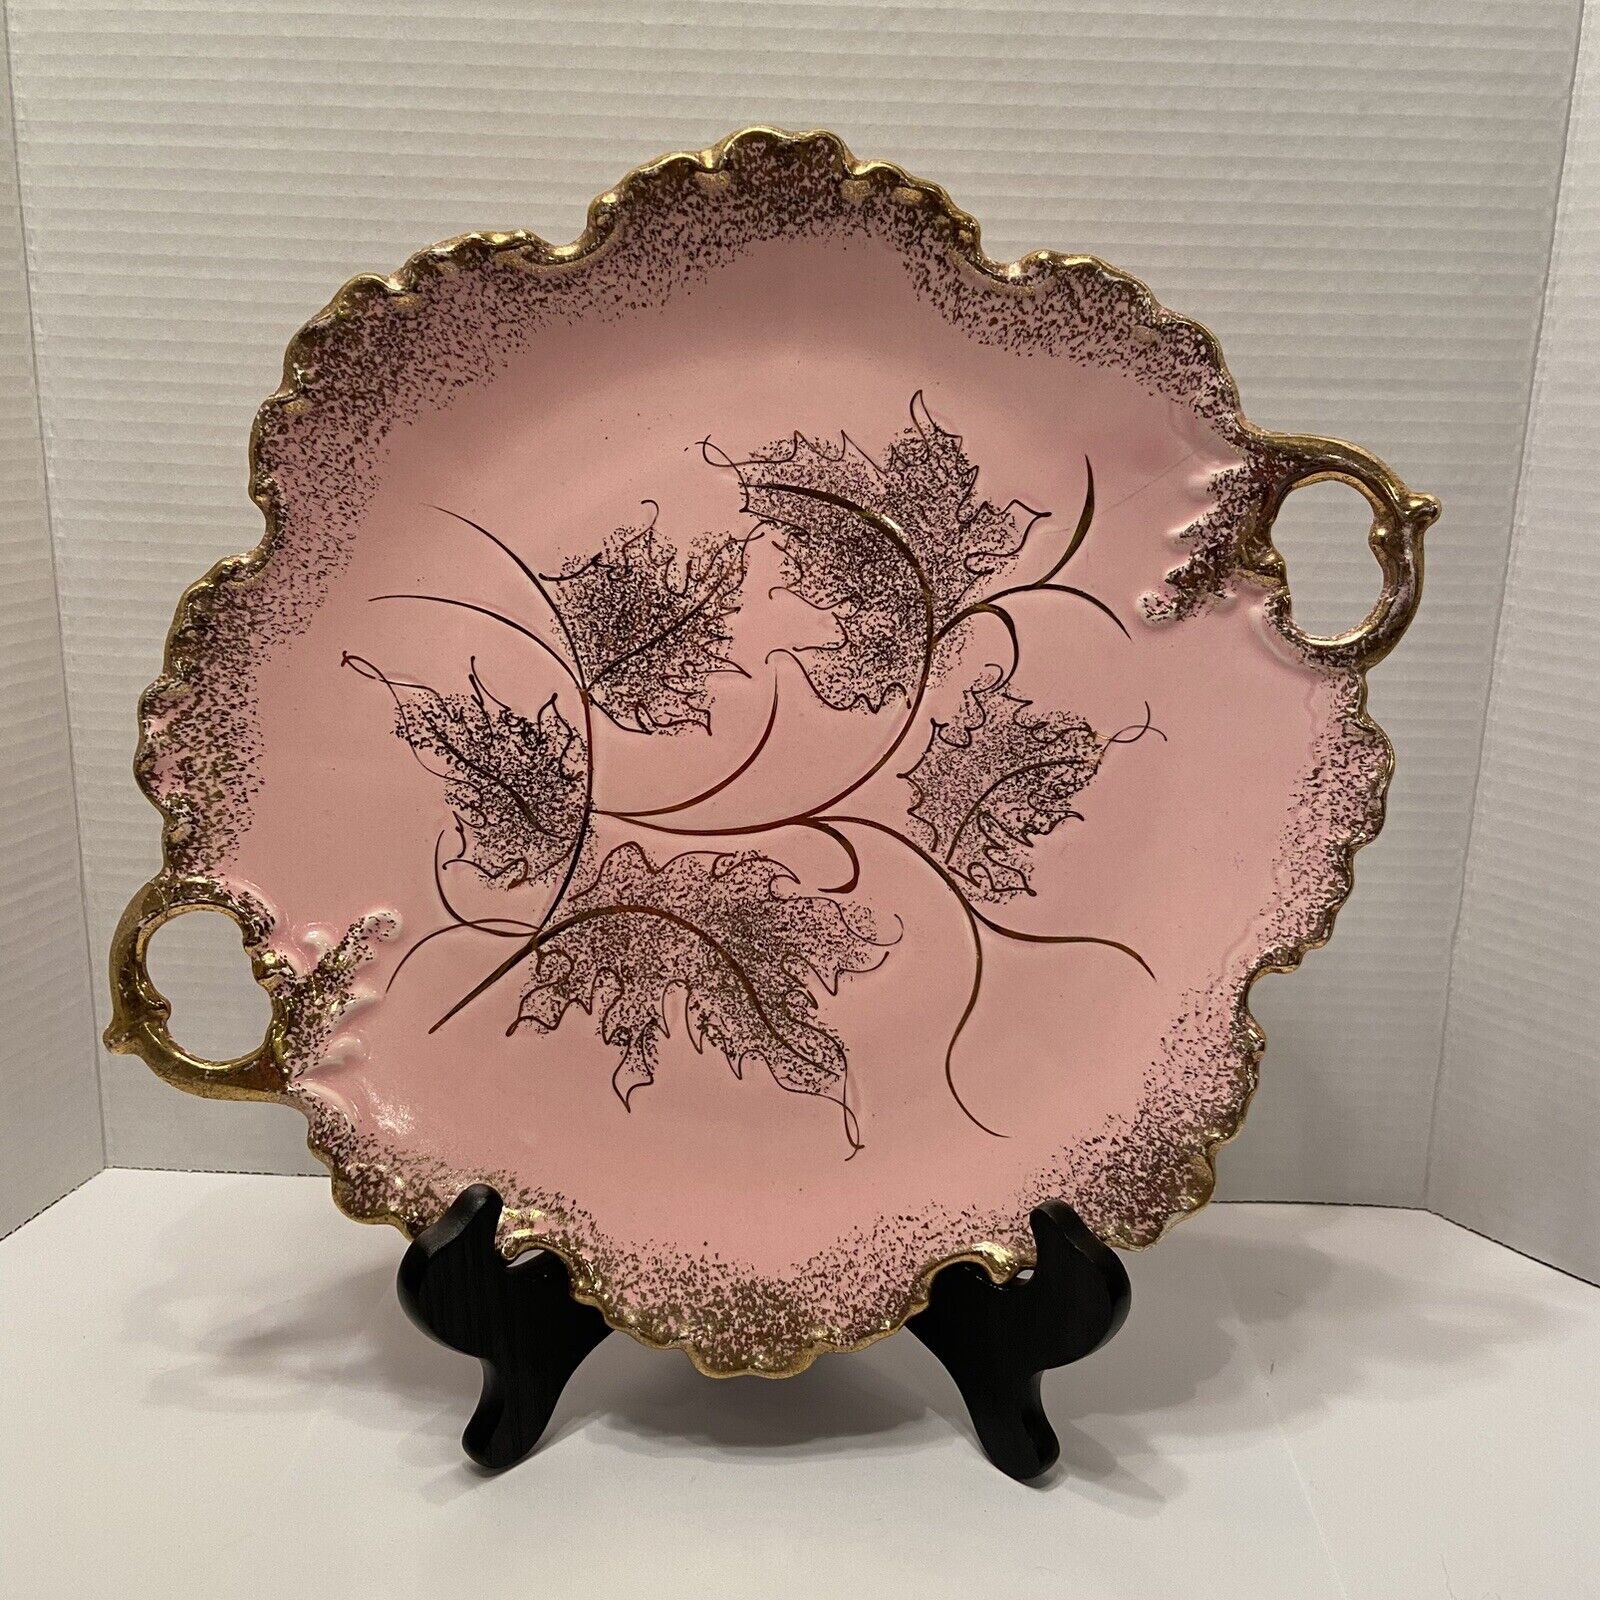 California Original Pottery Pink and Gold Scalloped Two Handle Serving Tray